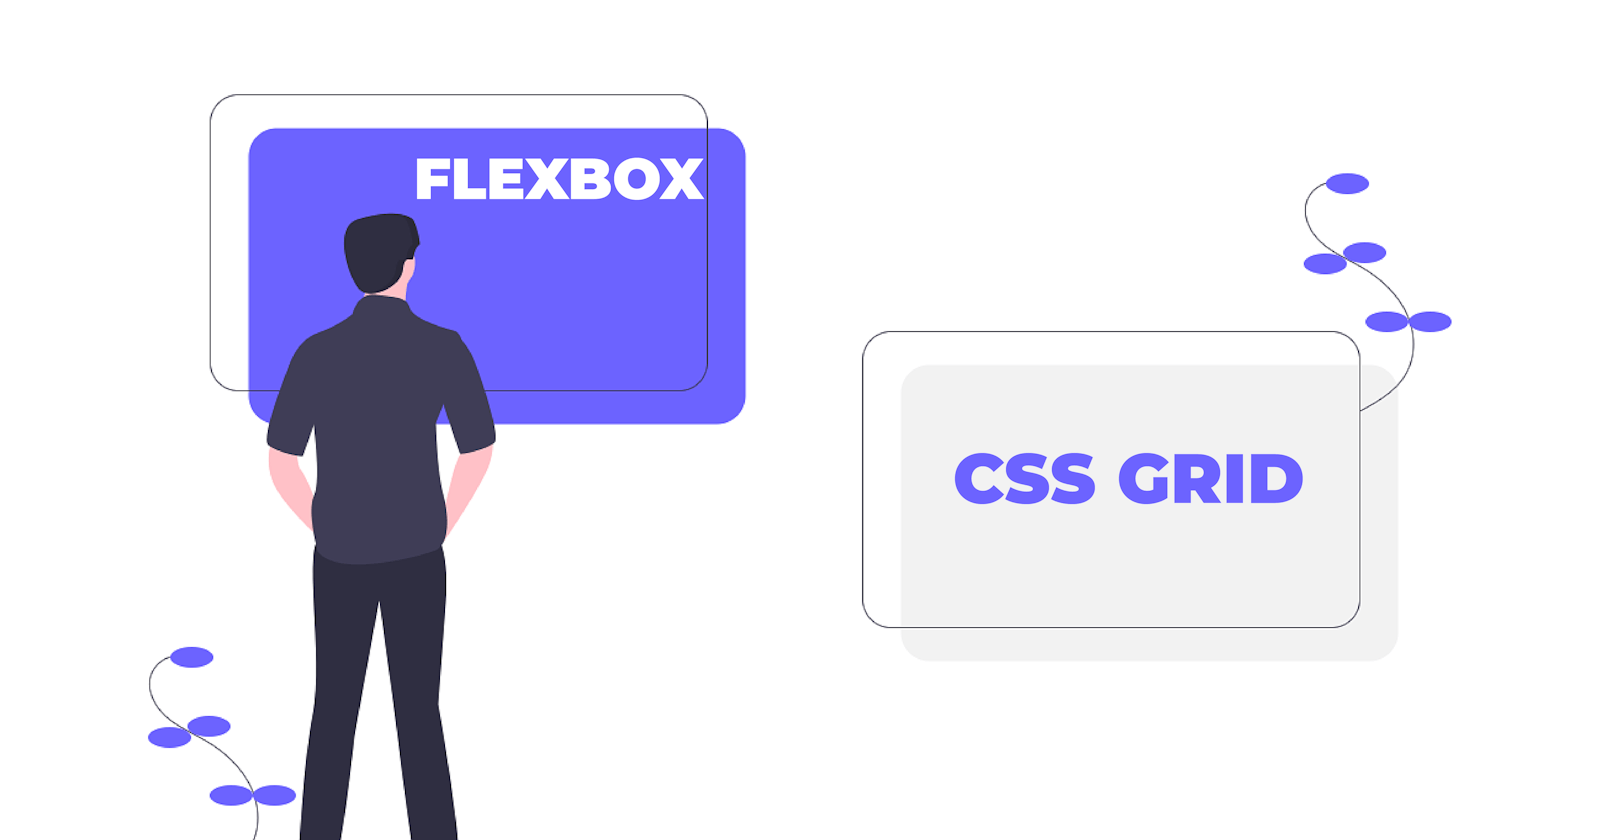 WHICH DO I USE: FLEXBOX OR CSS GRID